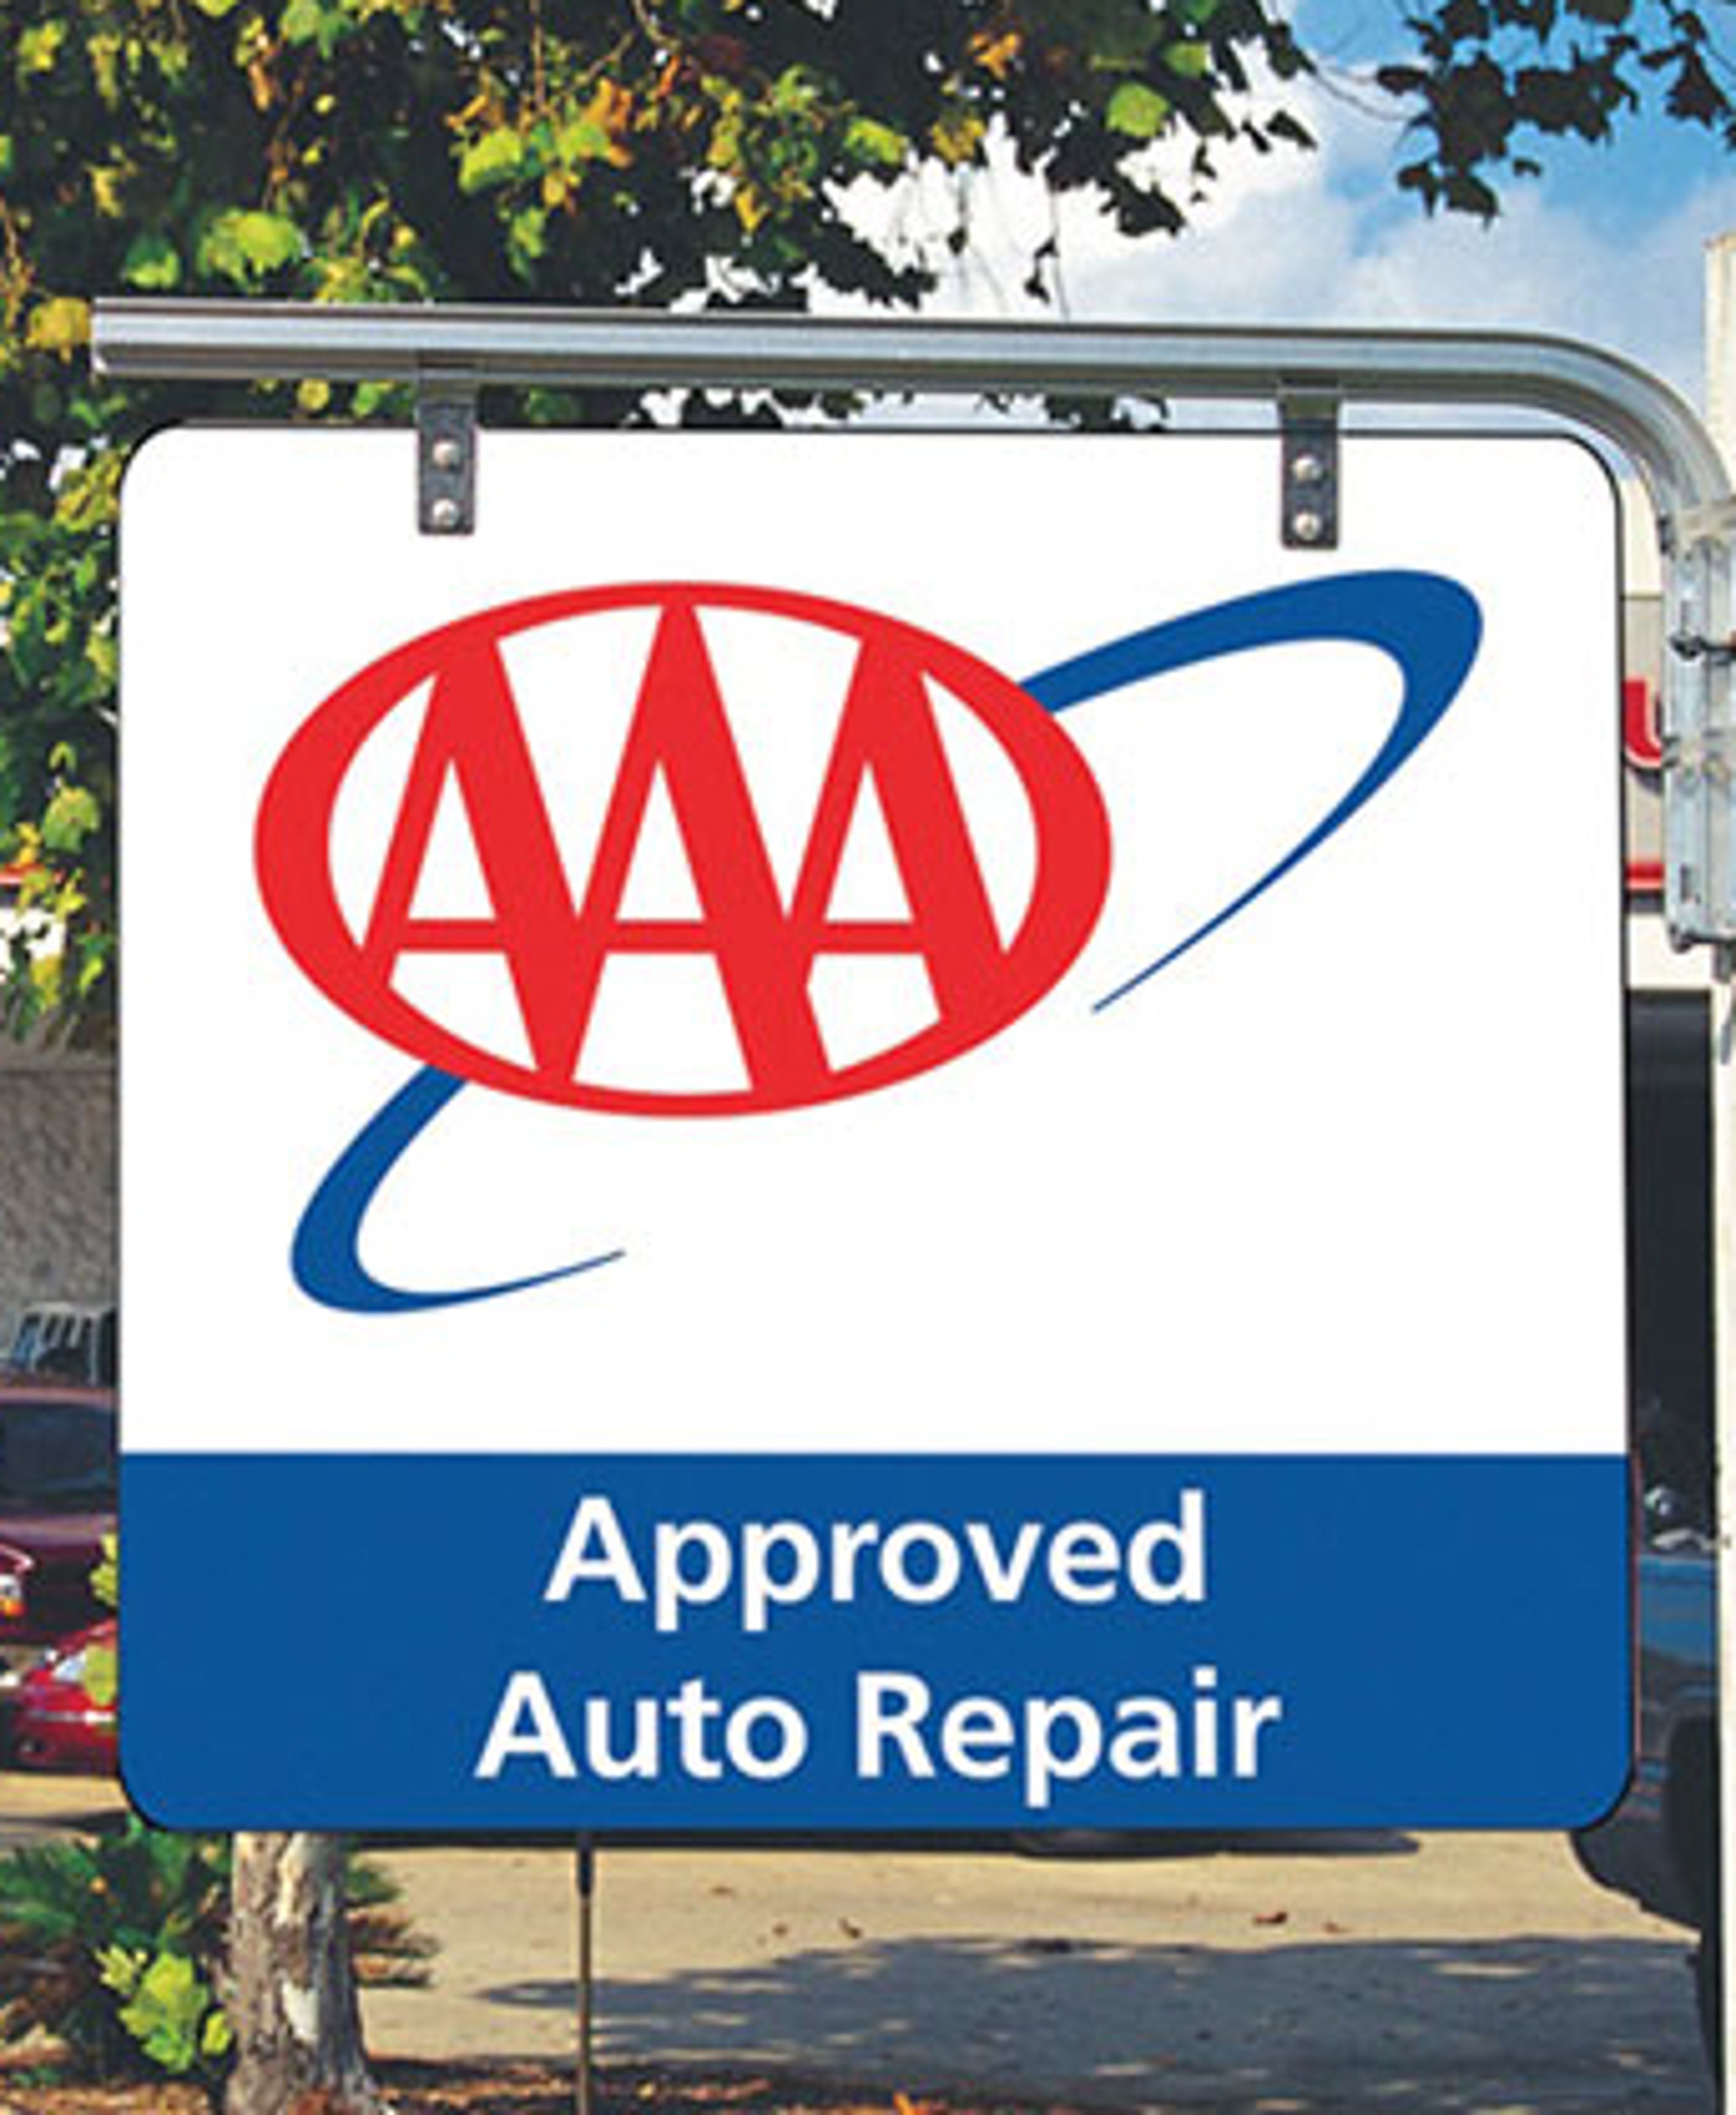 AAA approved auto repair sign in front of shop